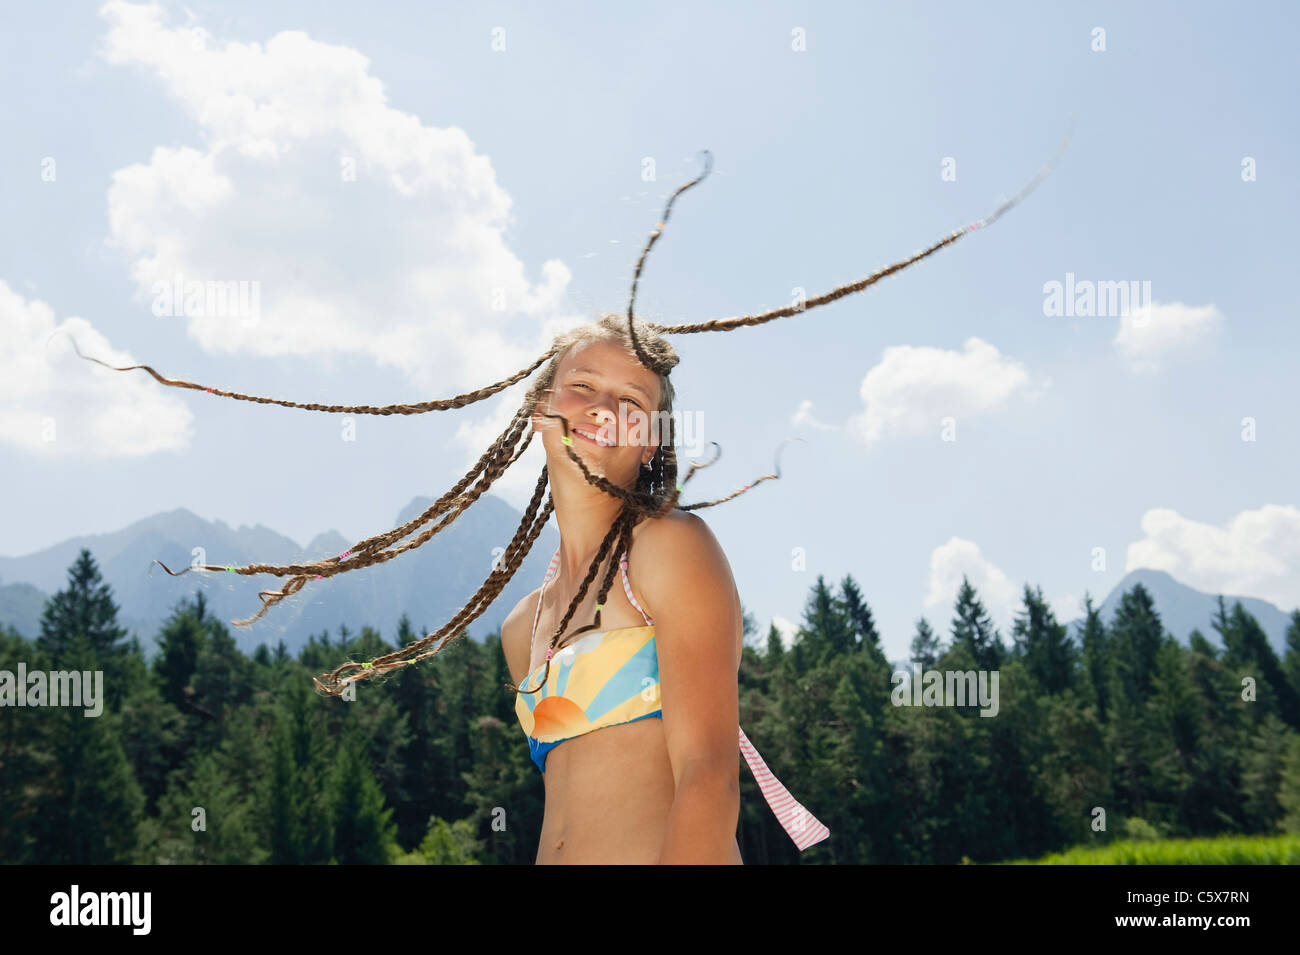 Italy, South Tyrol, Girl (13-14) with dreadlocks, smiling, portrait Stock Photo